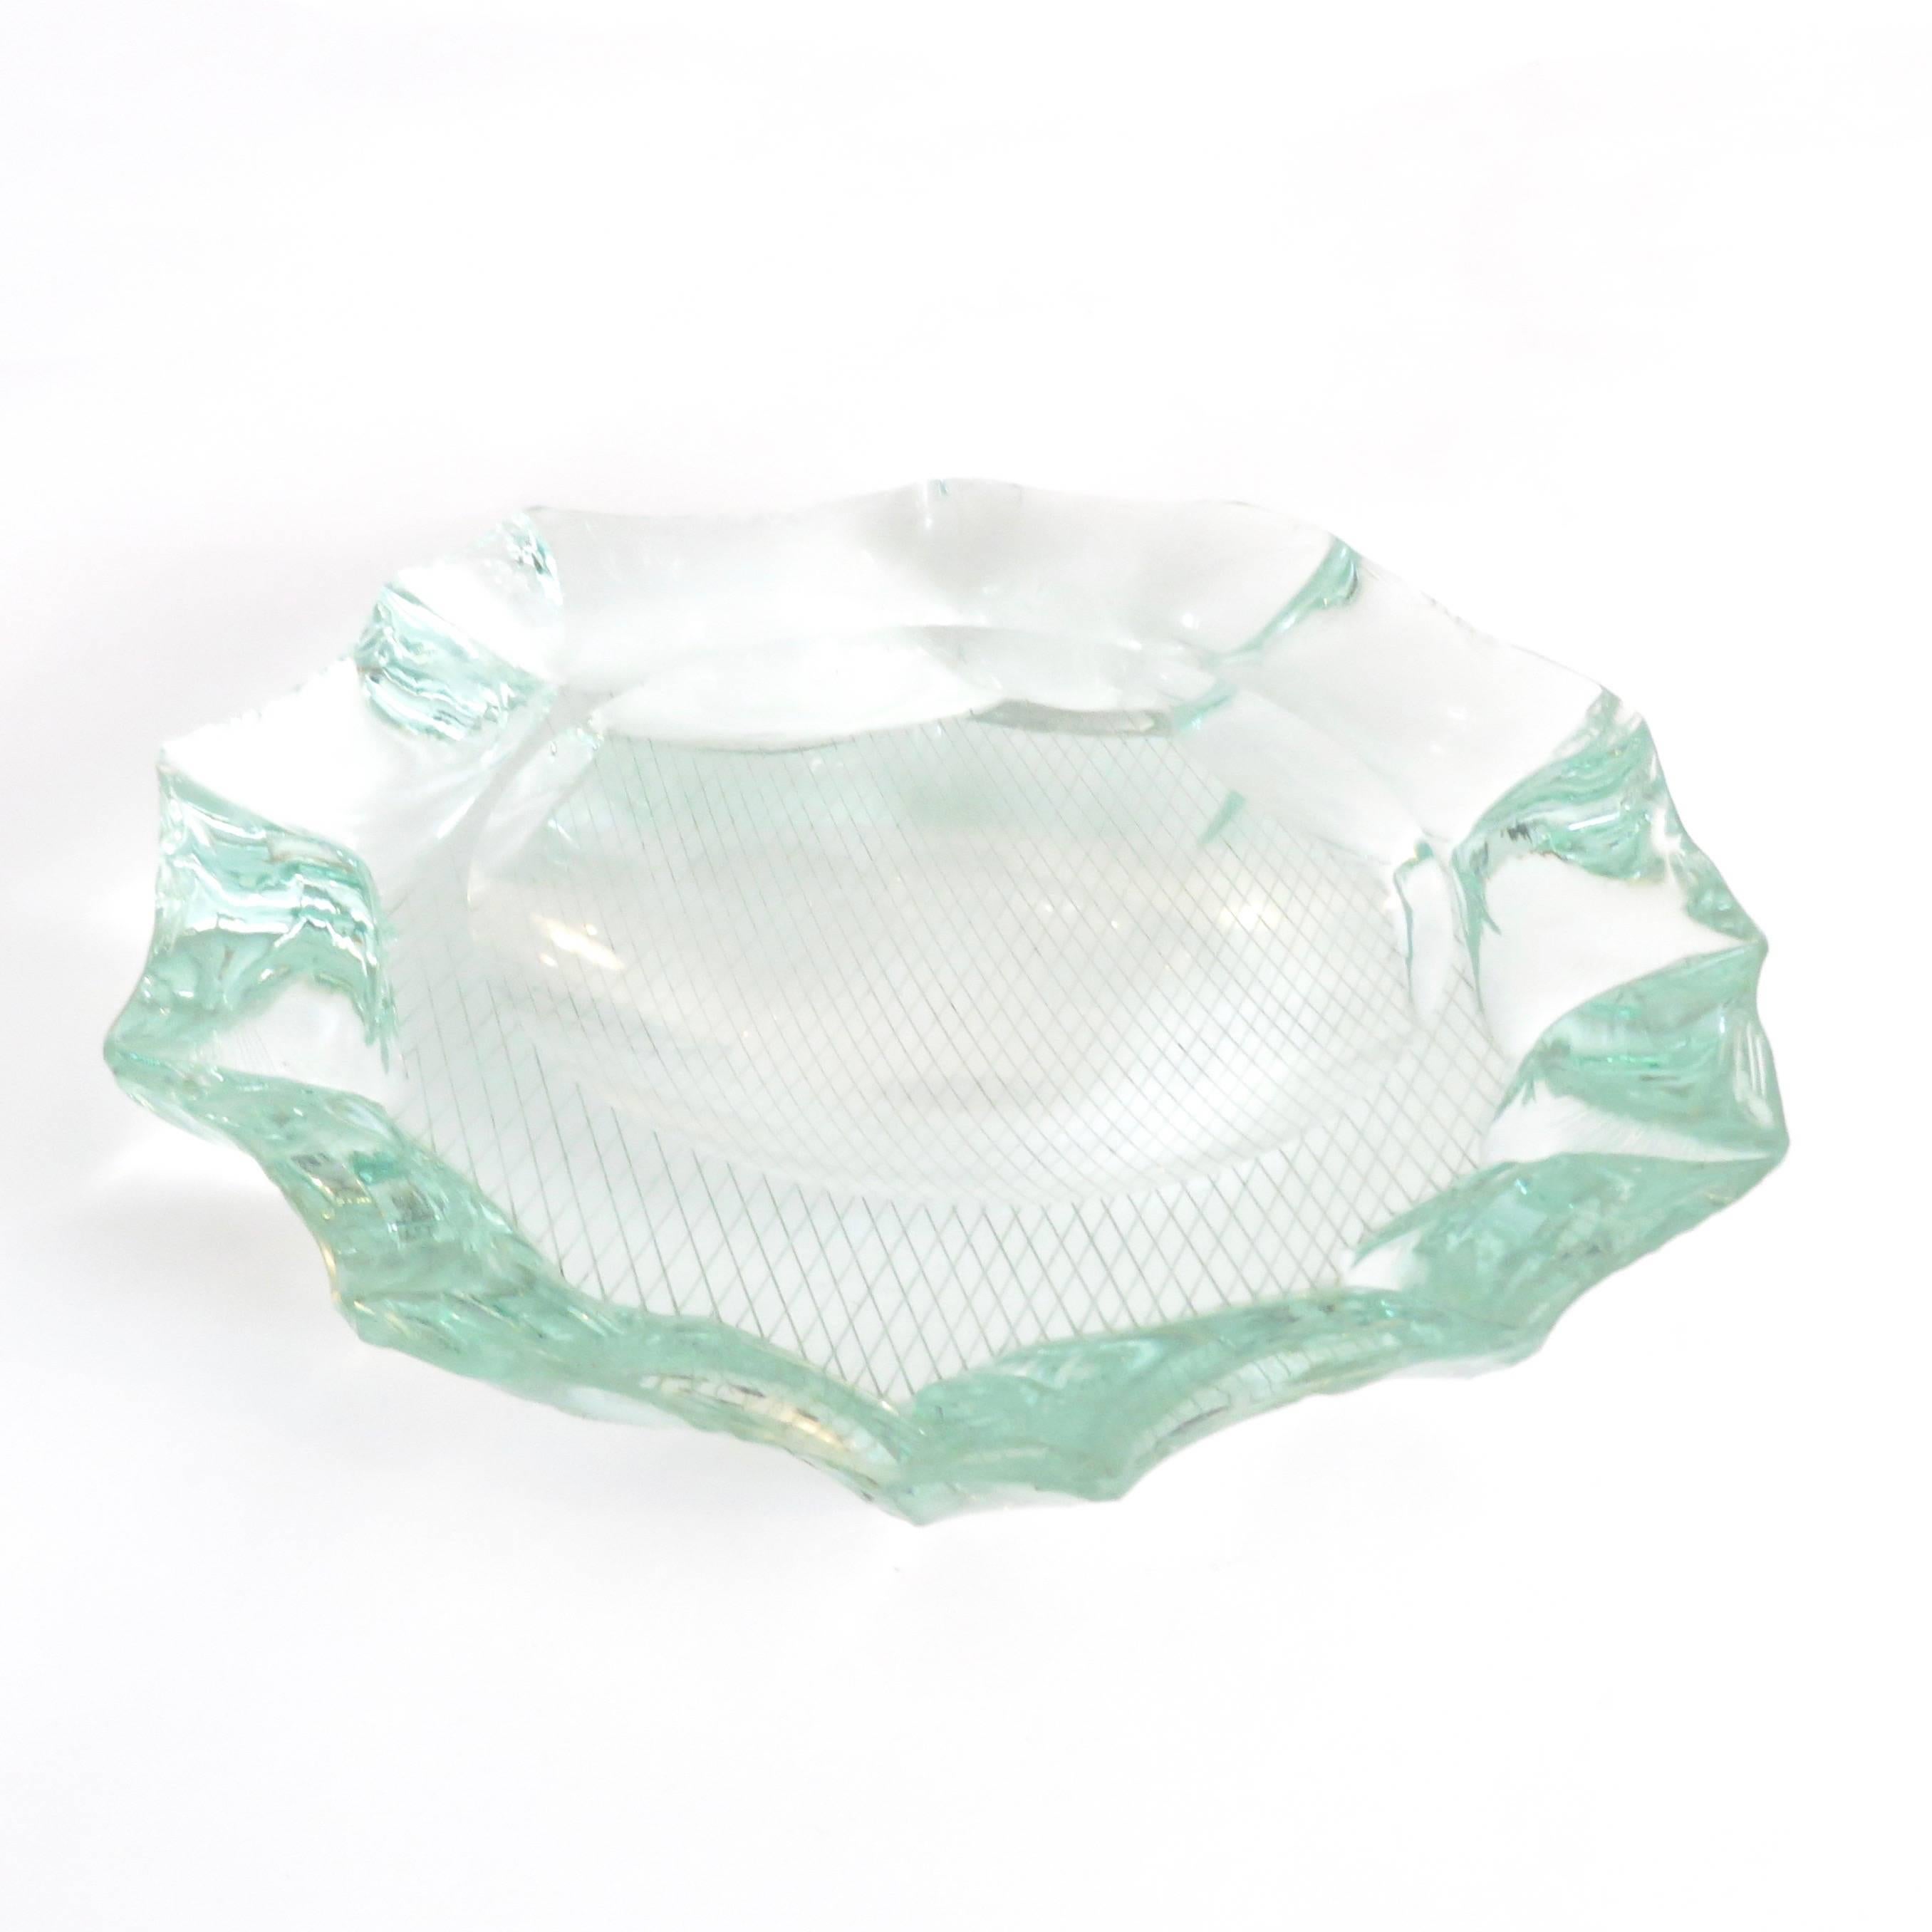 Round sculpted edge and incised, glass dish designed by Pietro Chiesa for Fontana Arte, circa 1940.
Collectable crystal bowl with "scalpellato" edges by Italian master designer Pietro Chiesa for Fontana Arte. The underside of the glass has